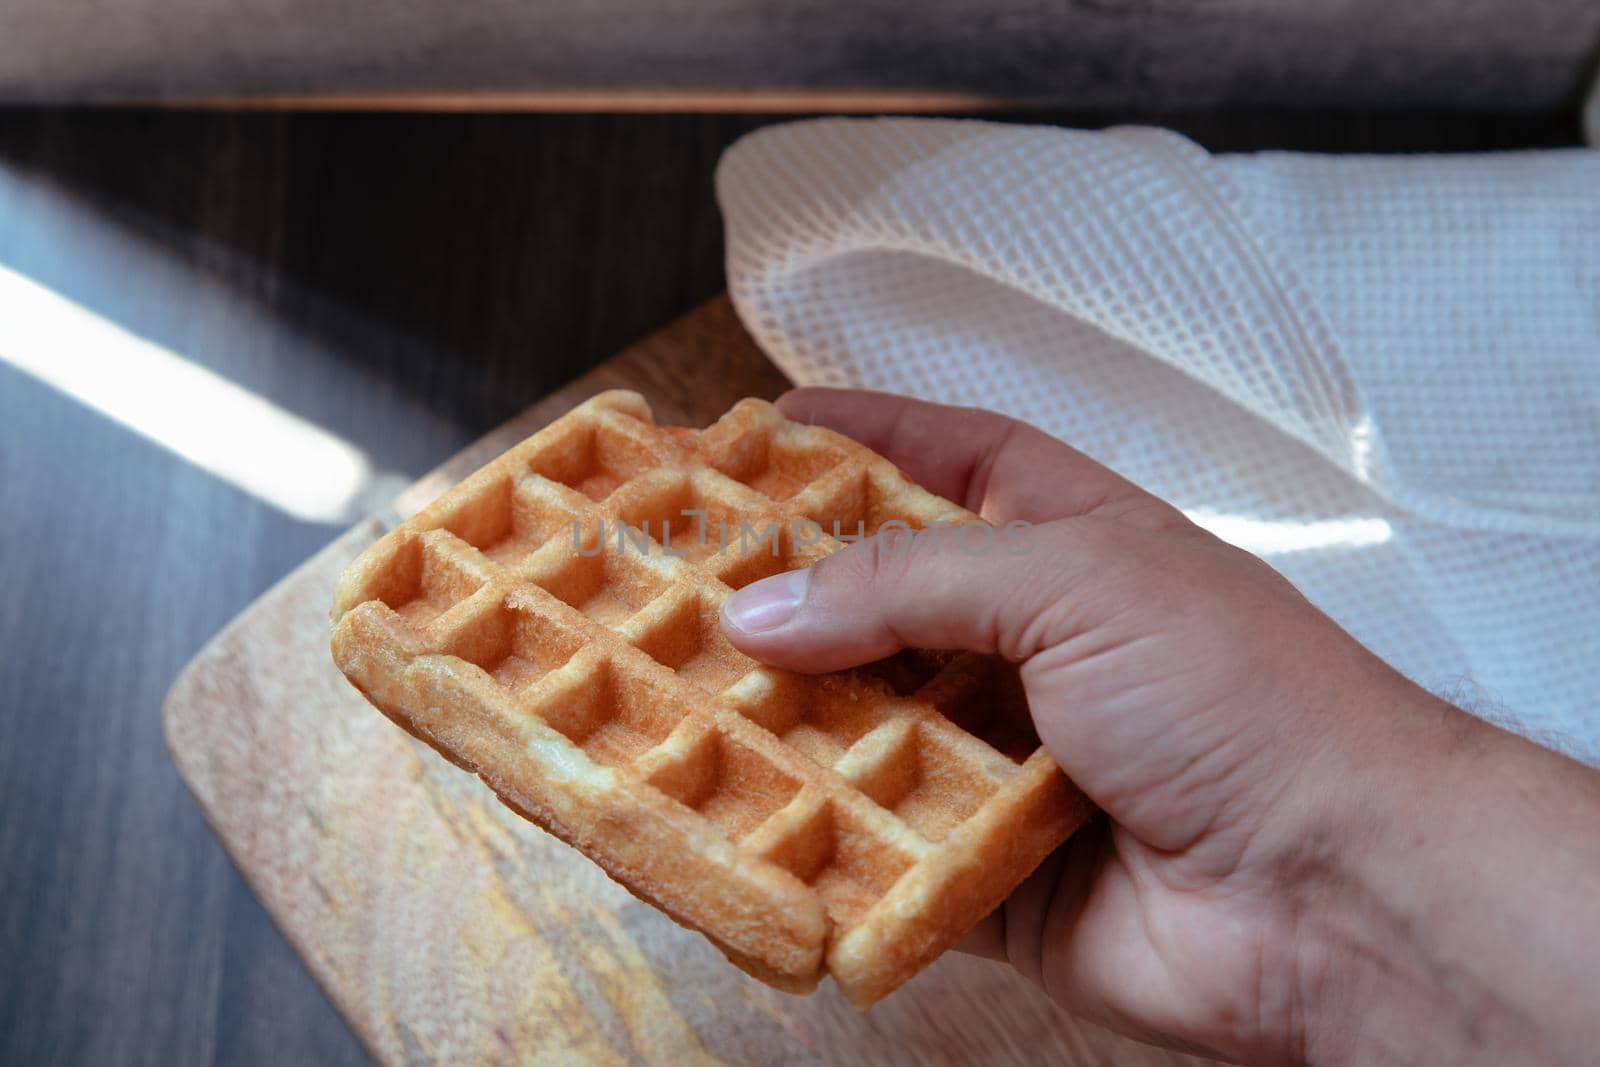 hand taking a waffle from the plate by jatmikaV